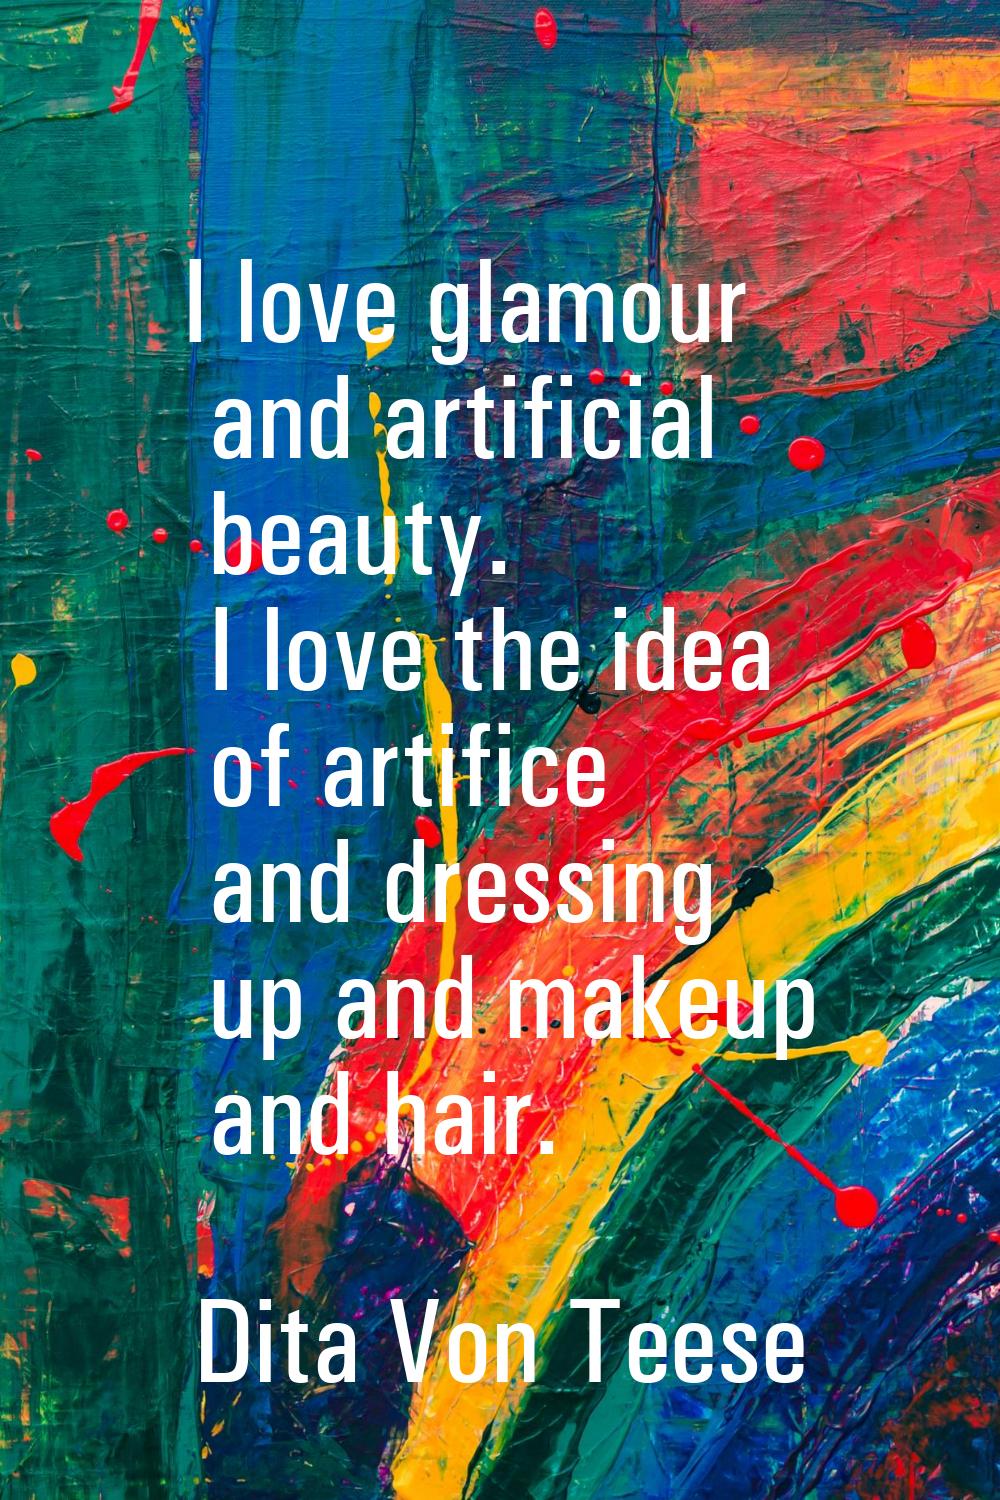 I love glamour and artificial beauty. I love the idea of artifice and dressing up and makeup and ha